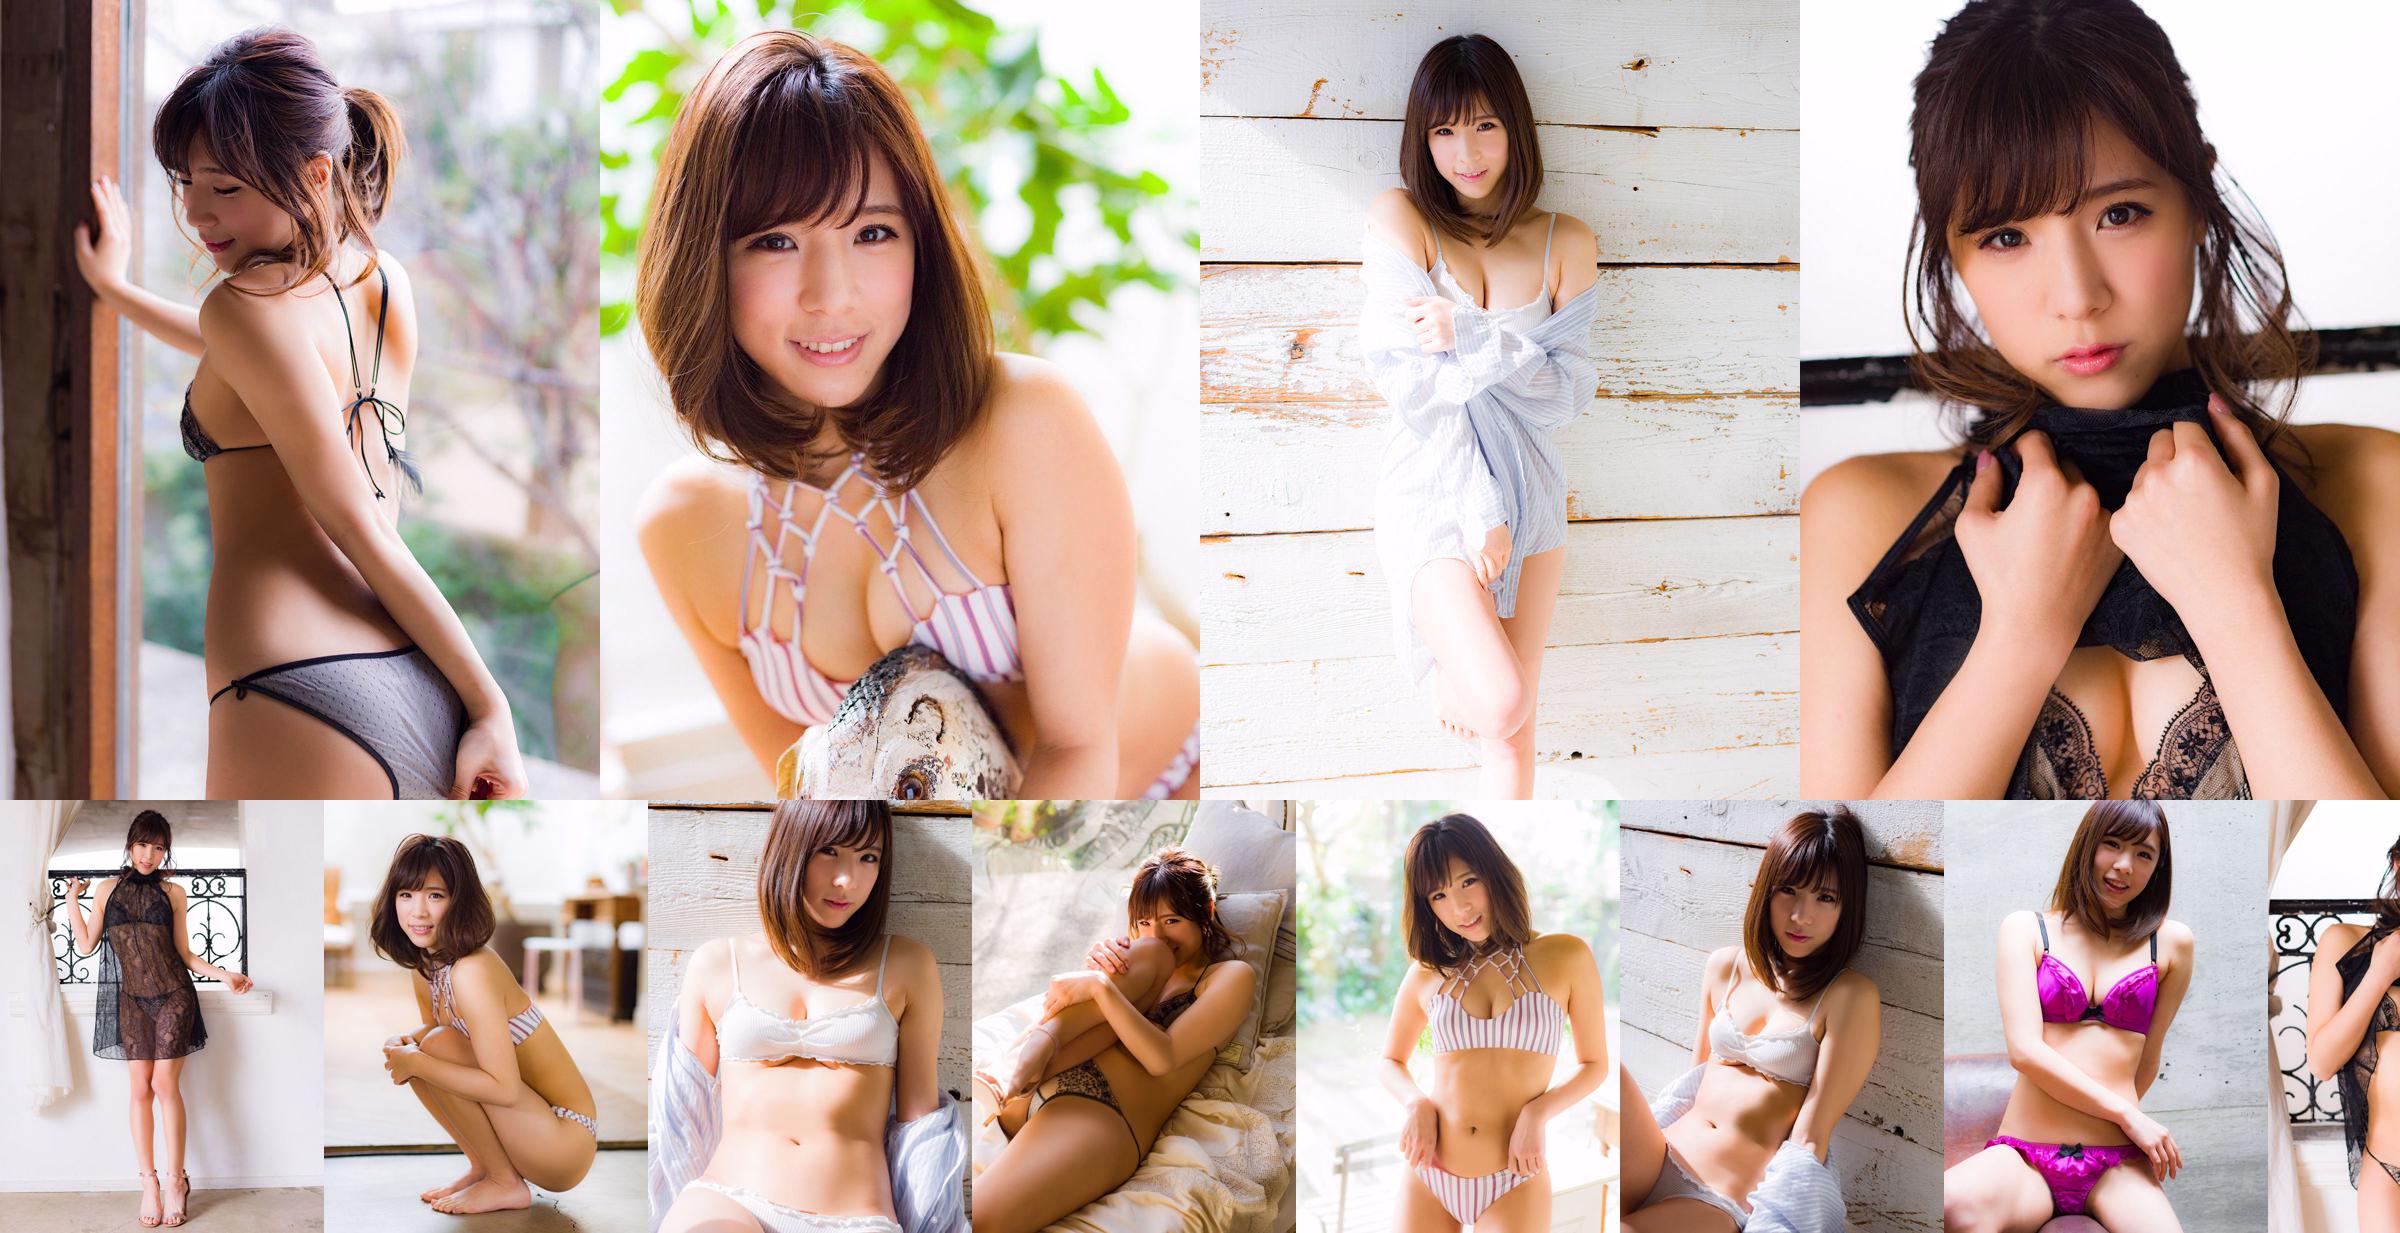 [DGC] 2019.01 あさみ Natsumoto "After the event, グラビアに challenge!  No.58801b Page 50